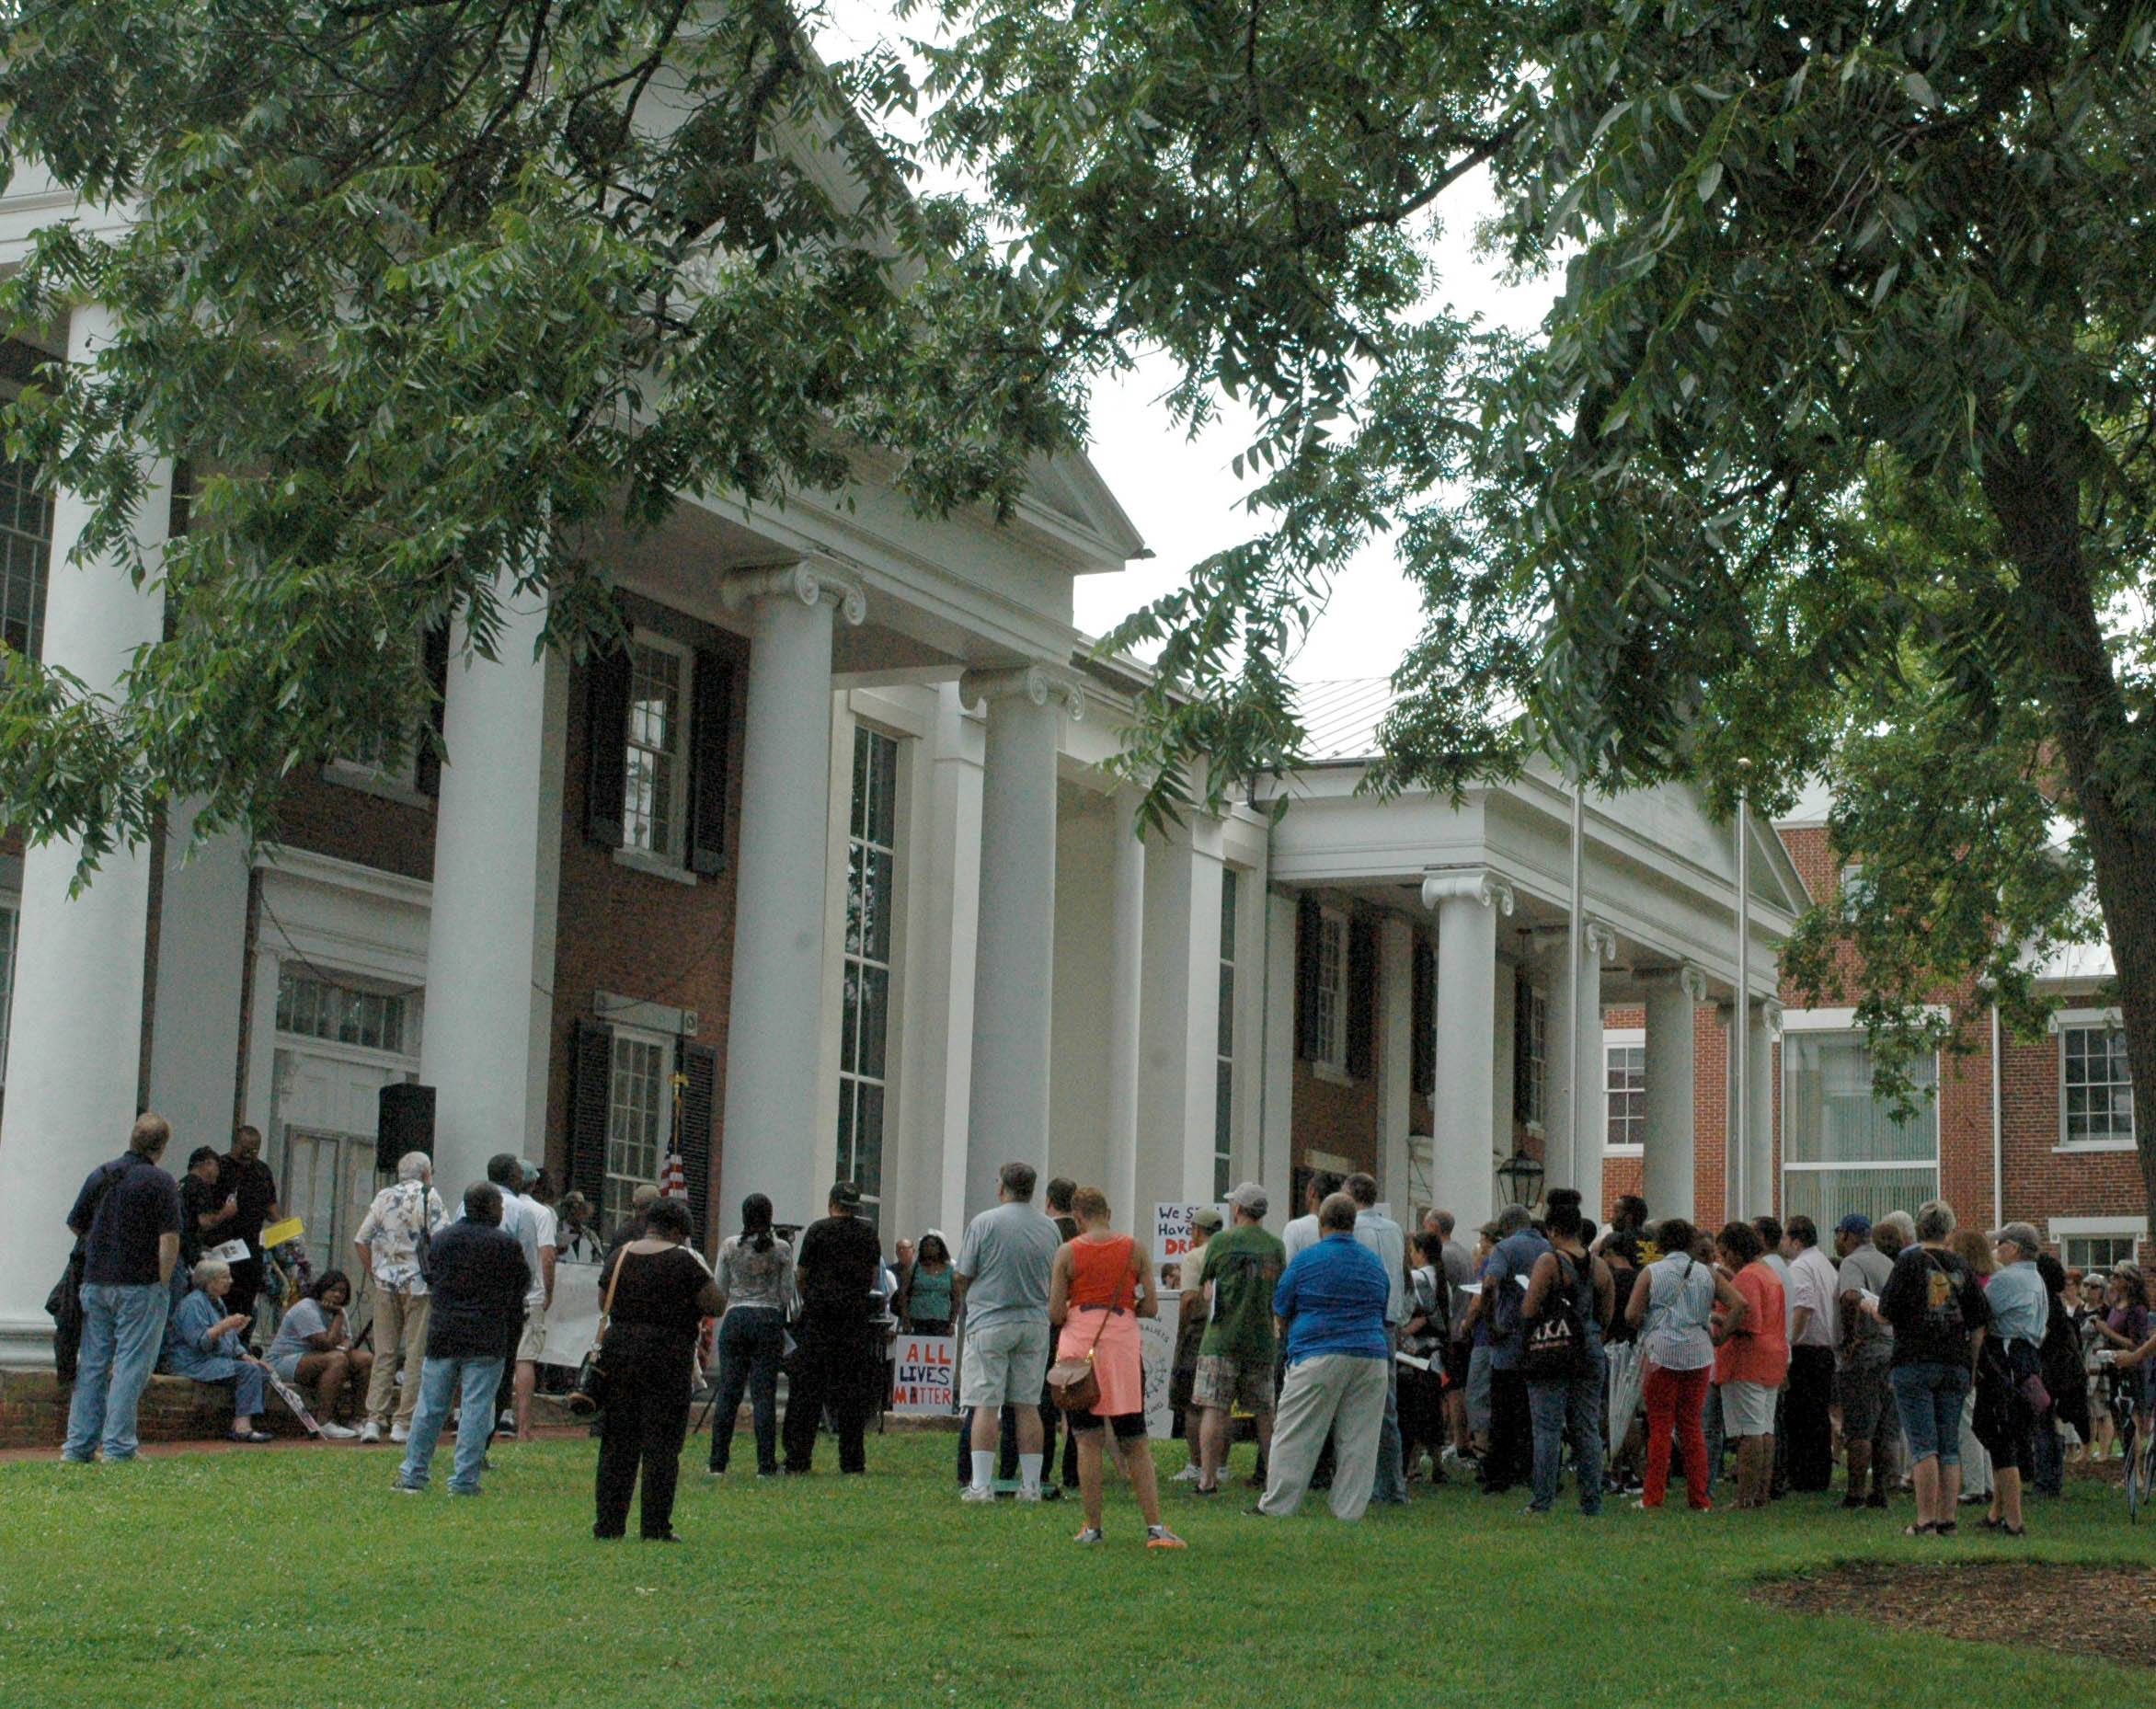 The crowd gathered in front of the Loudoun County courthouse in Leesburg on July 18 listened attentively to speakers at a rally sponsored by the Loudoun NAACP.